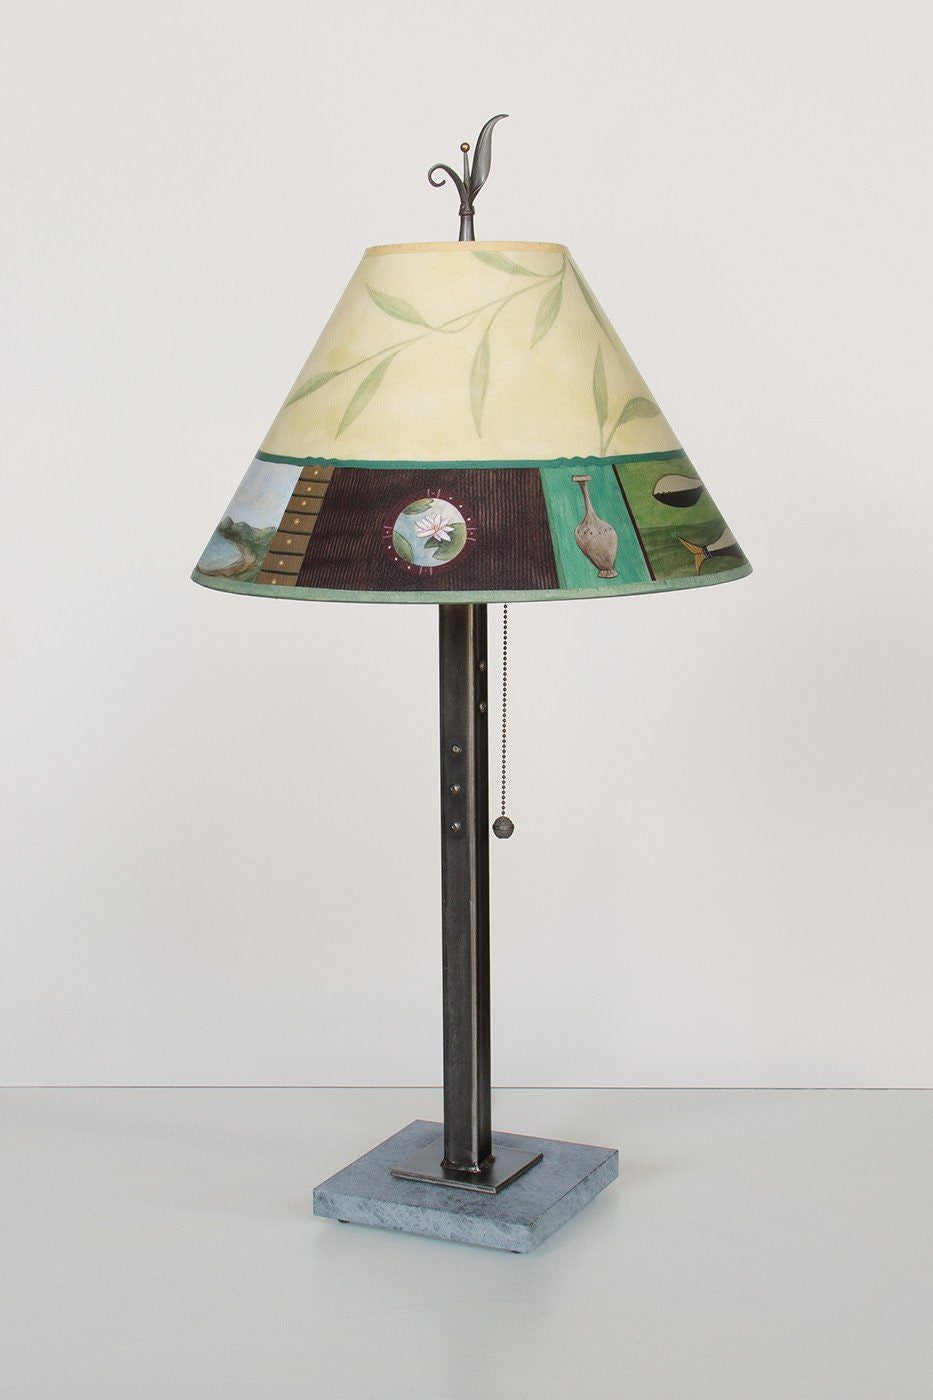 Steel Table Lamp on Marble with Medium Conical Shade in Twin Fish